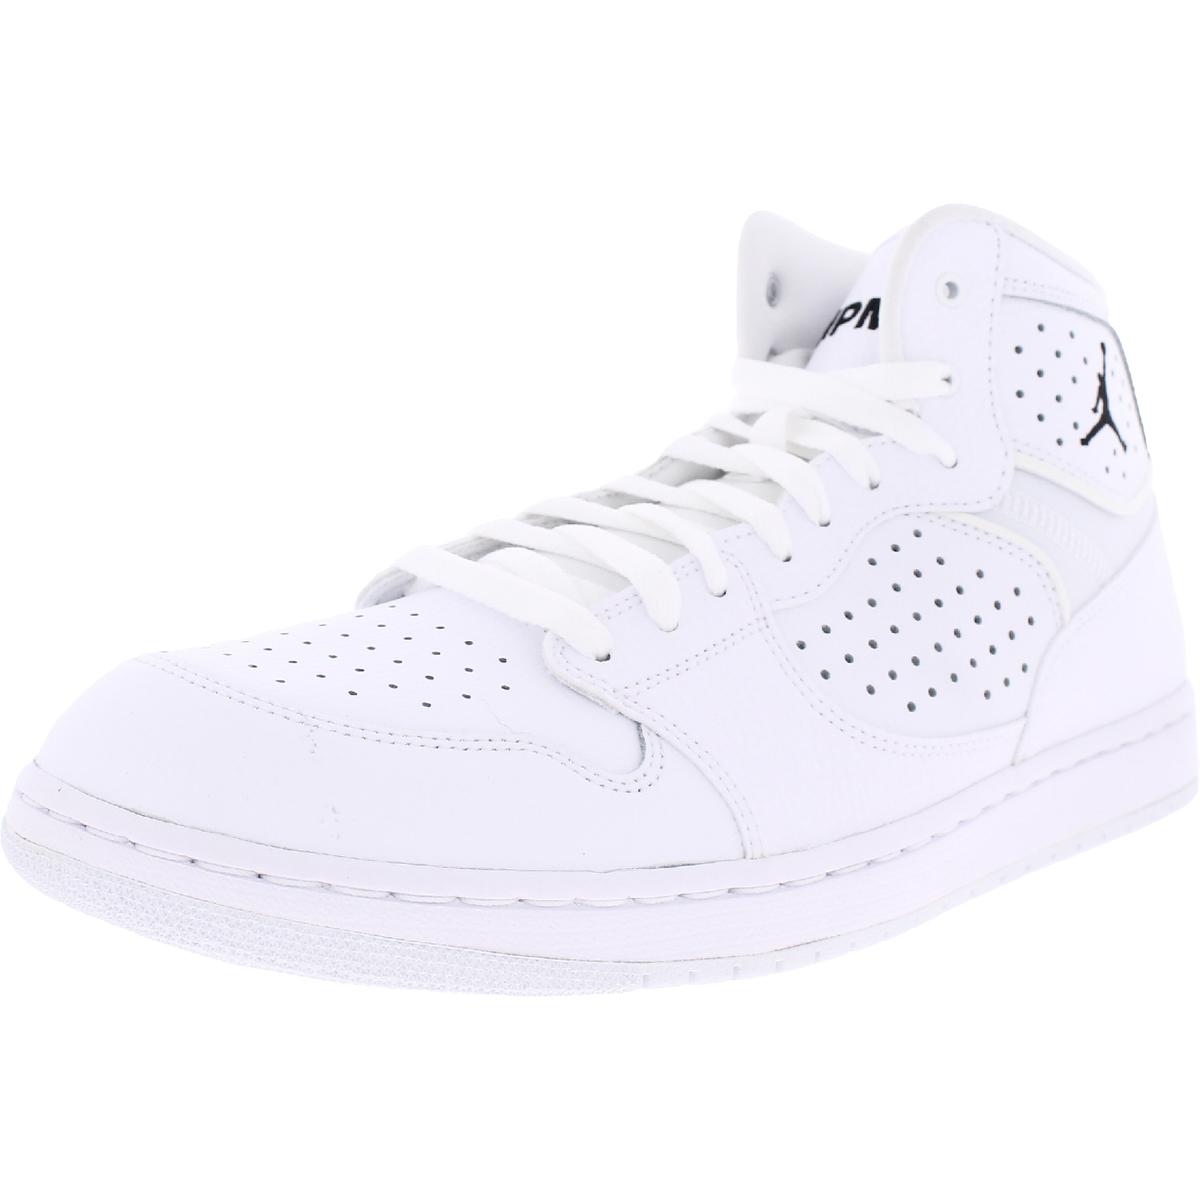 Nike Jordan Access Mens Performance Lifestyle Athletic and Training Shoes